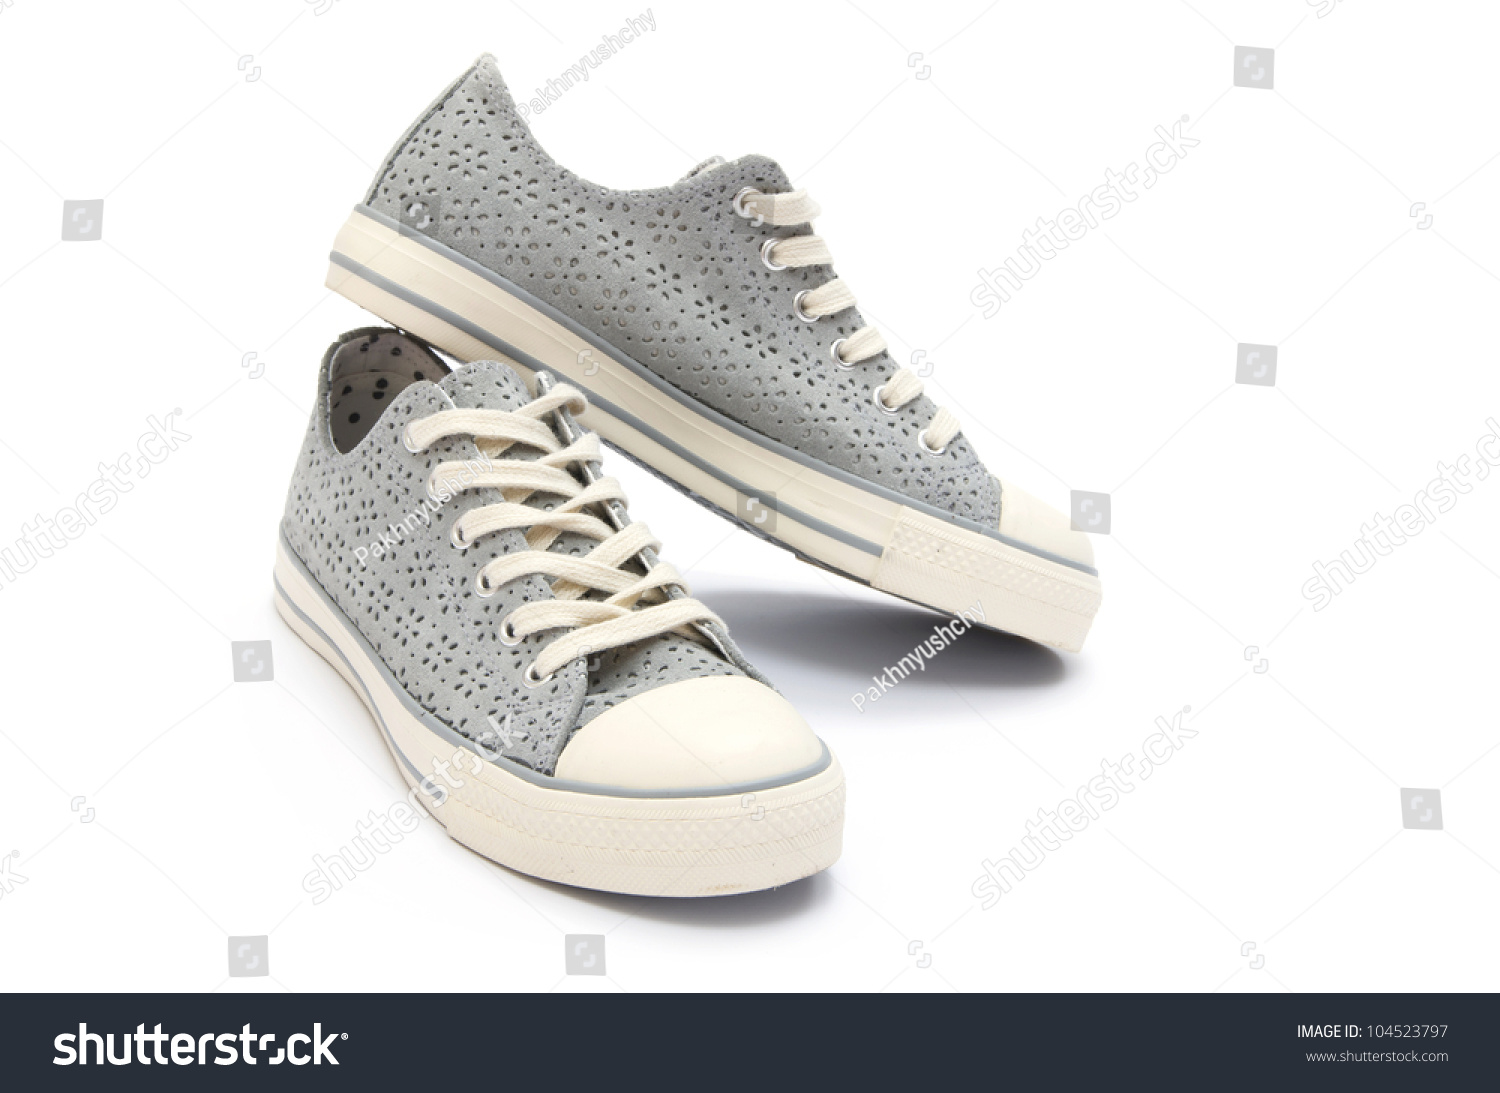 Pair Of Sneakers Isolated On White Background Stock Photo 104523797 ...